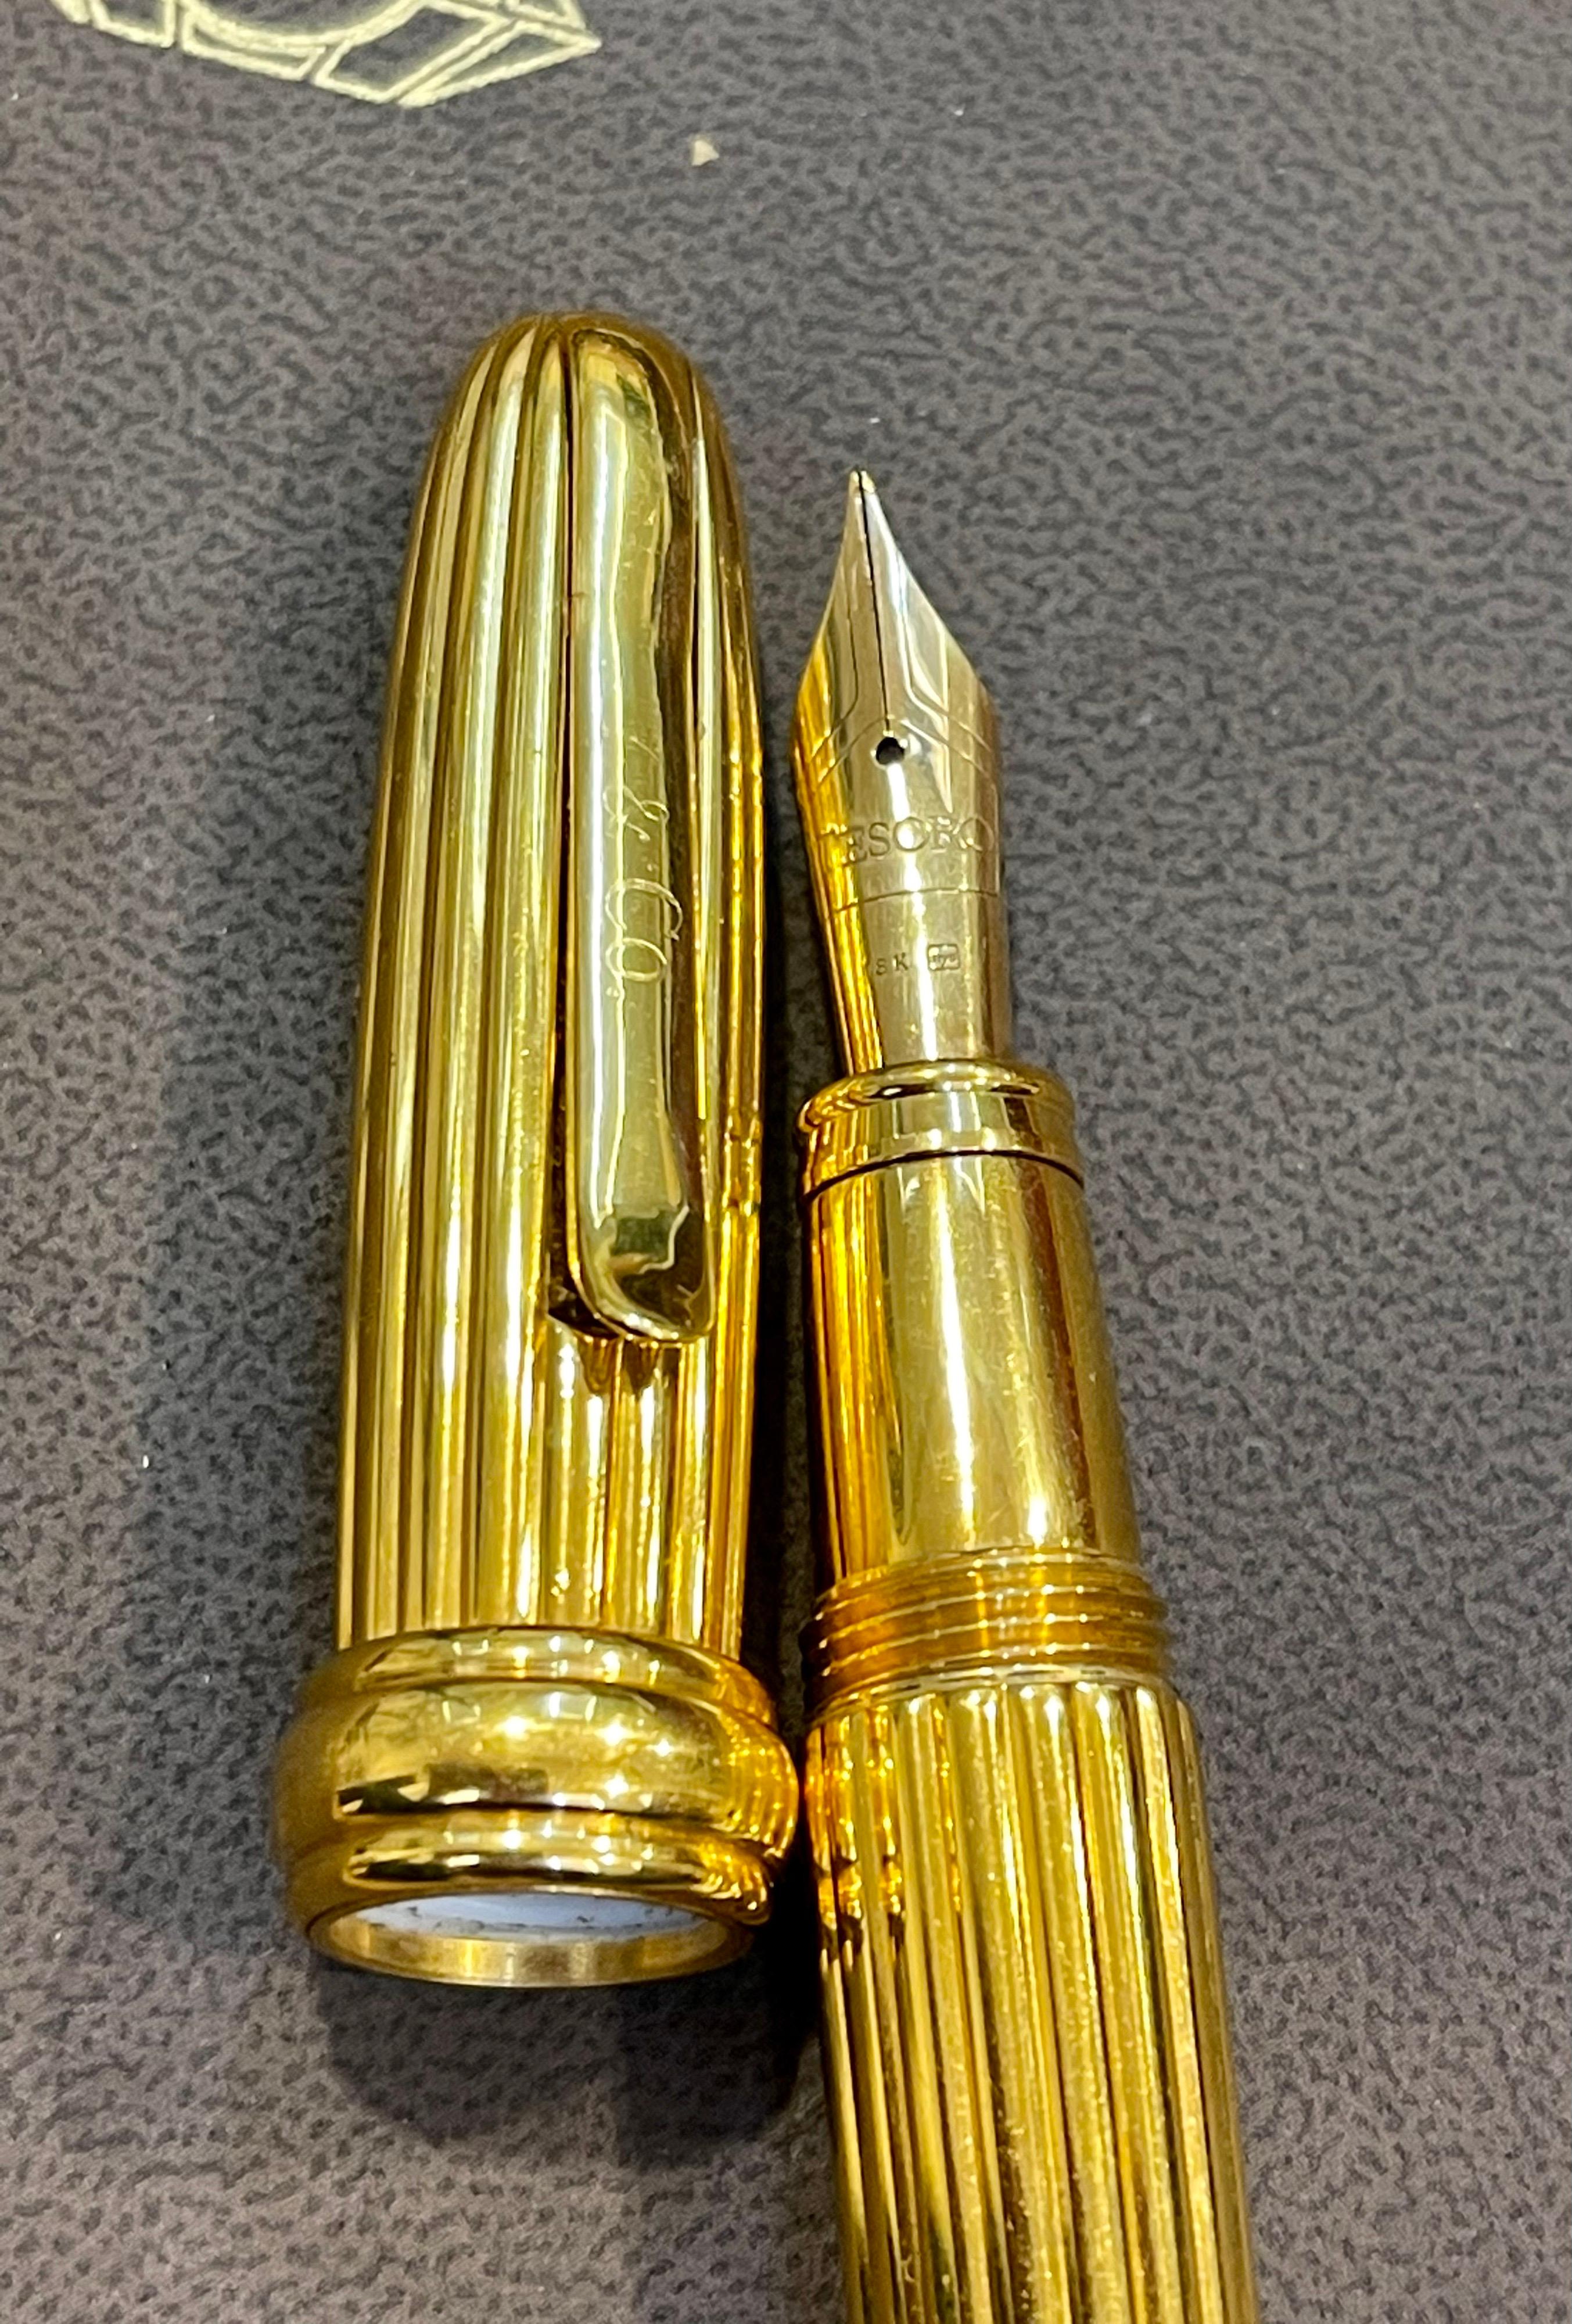 100 % authentic and Vintage T & CO
Ink Cartilage is dried so pen is not in working condition. Its very simple to order the new ink refill .
1990s vintage, pristine Tiffany Tesoro gold fountain pen having a gold-plated cap and barrel and with an